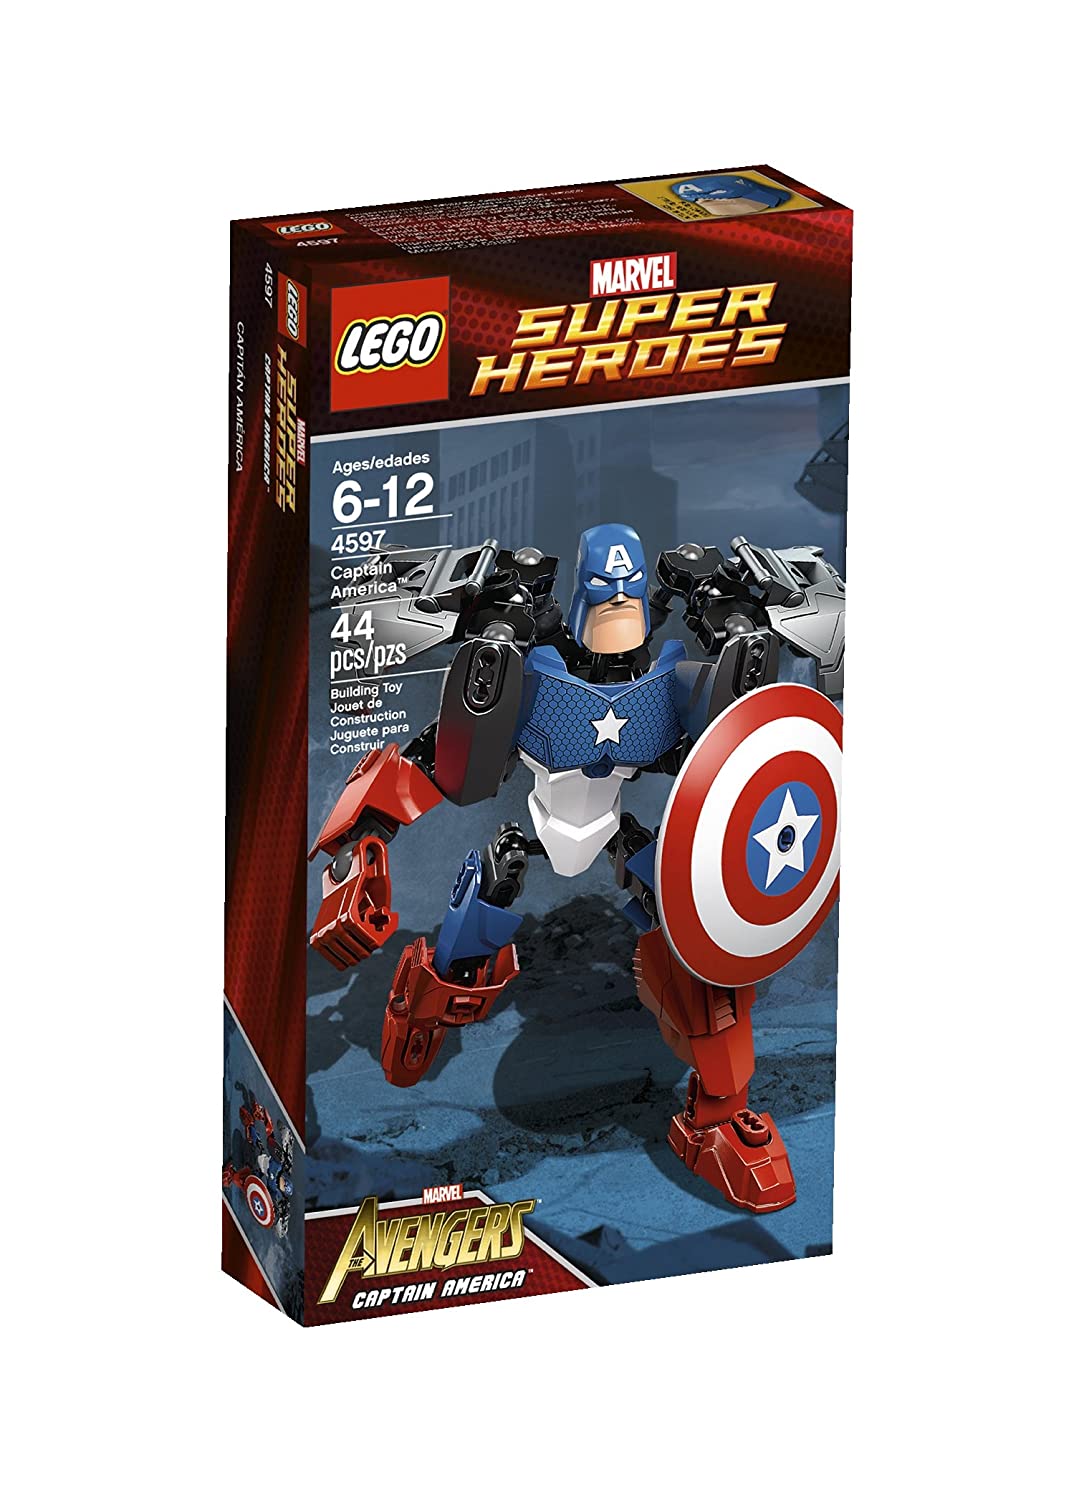 Top 9 Best LEGO Captain America Sets Reviews in 2022 2